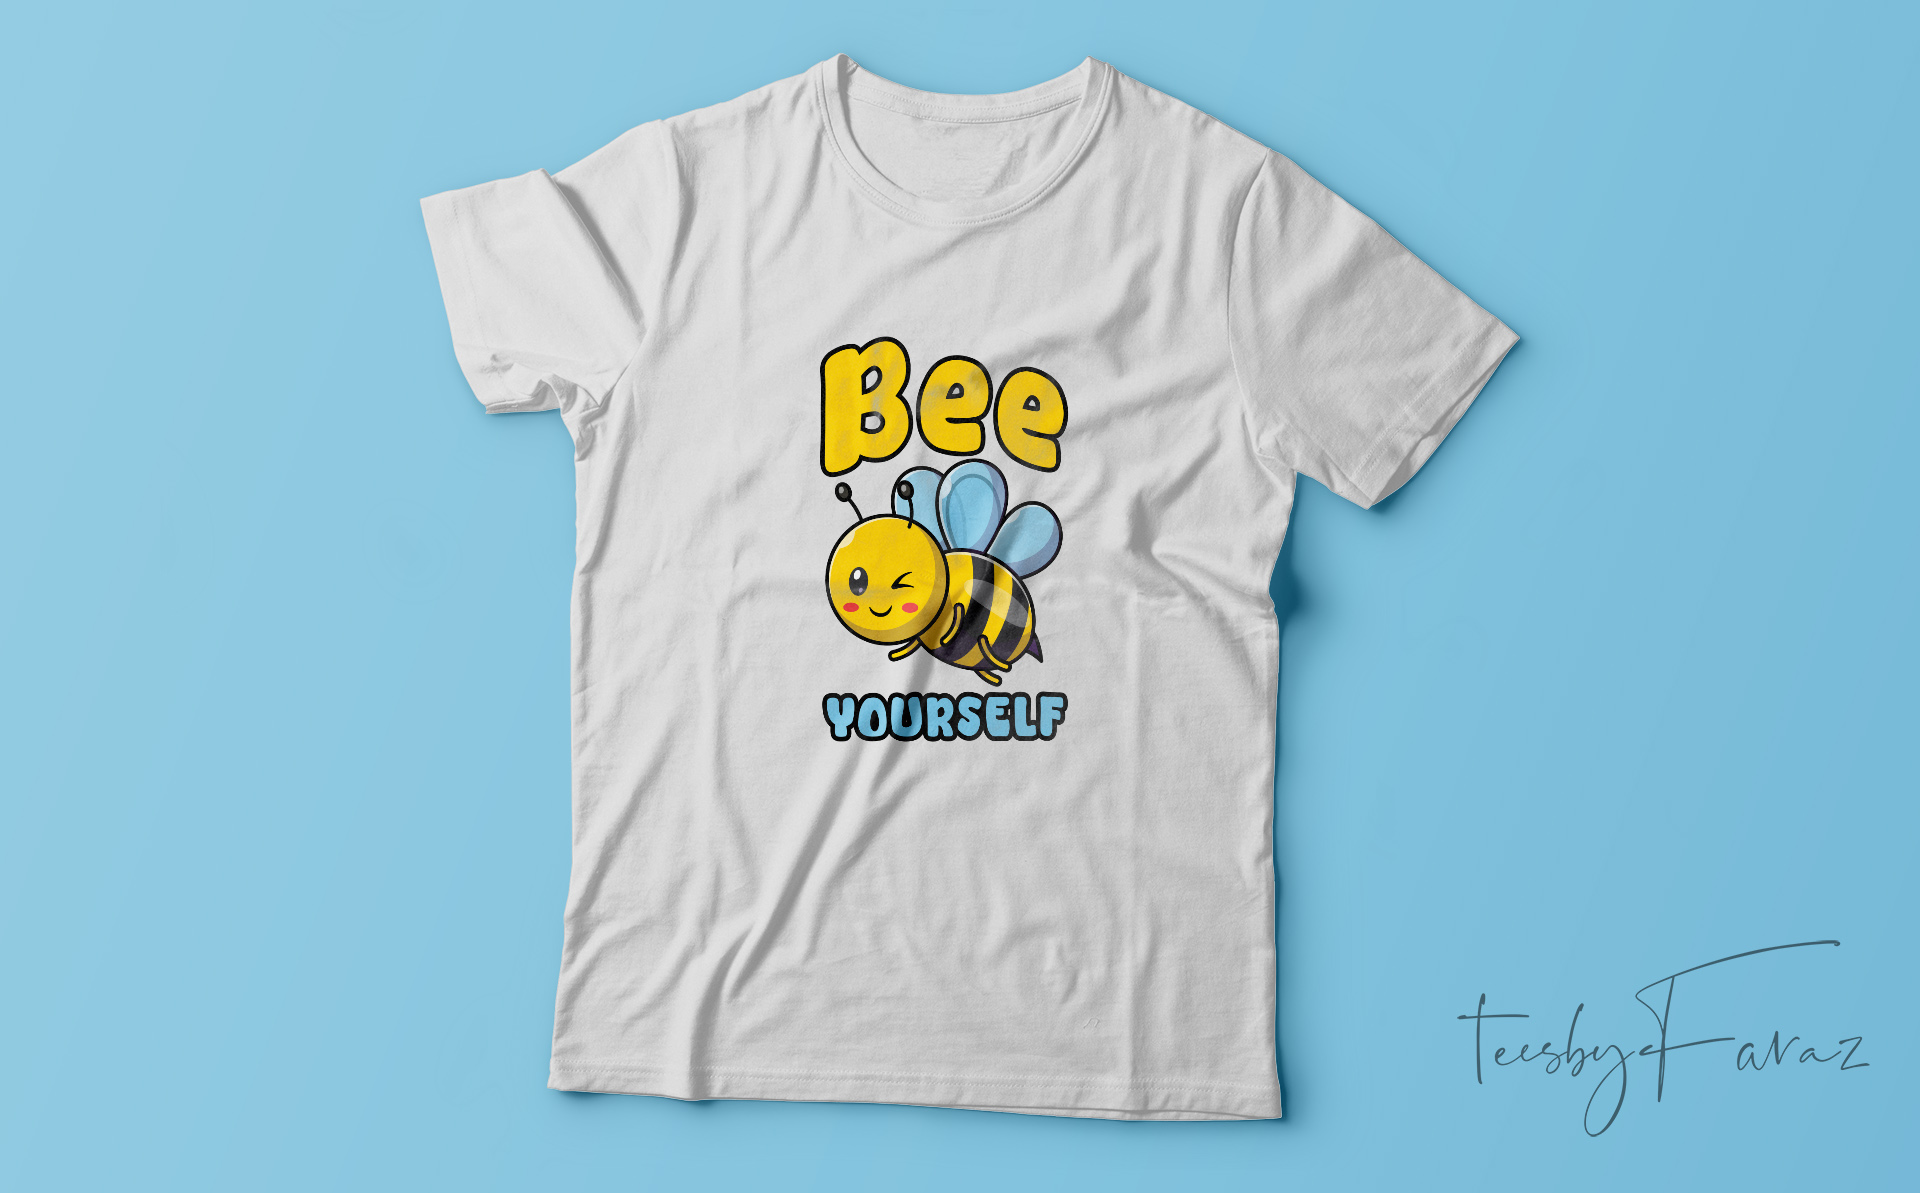 Bee-Yourself |Creative T-shirt design for sale - Buy t-shirt designs